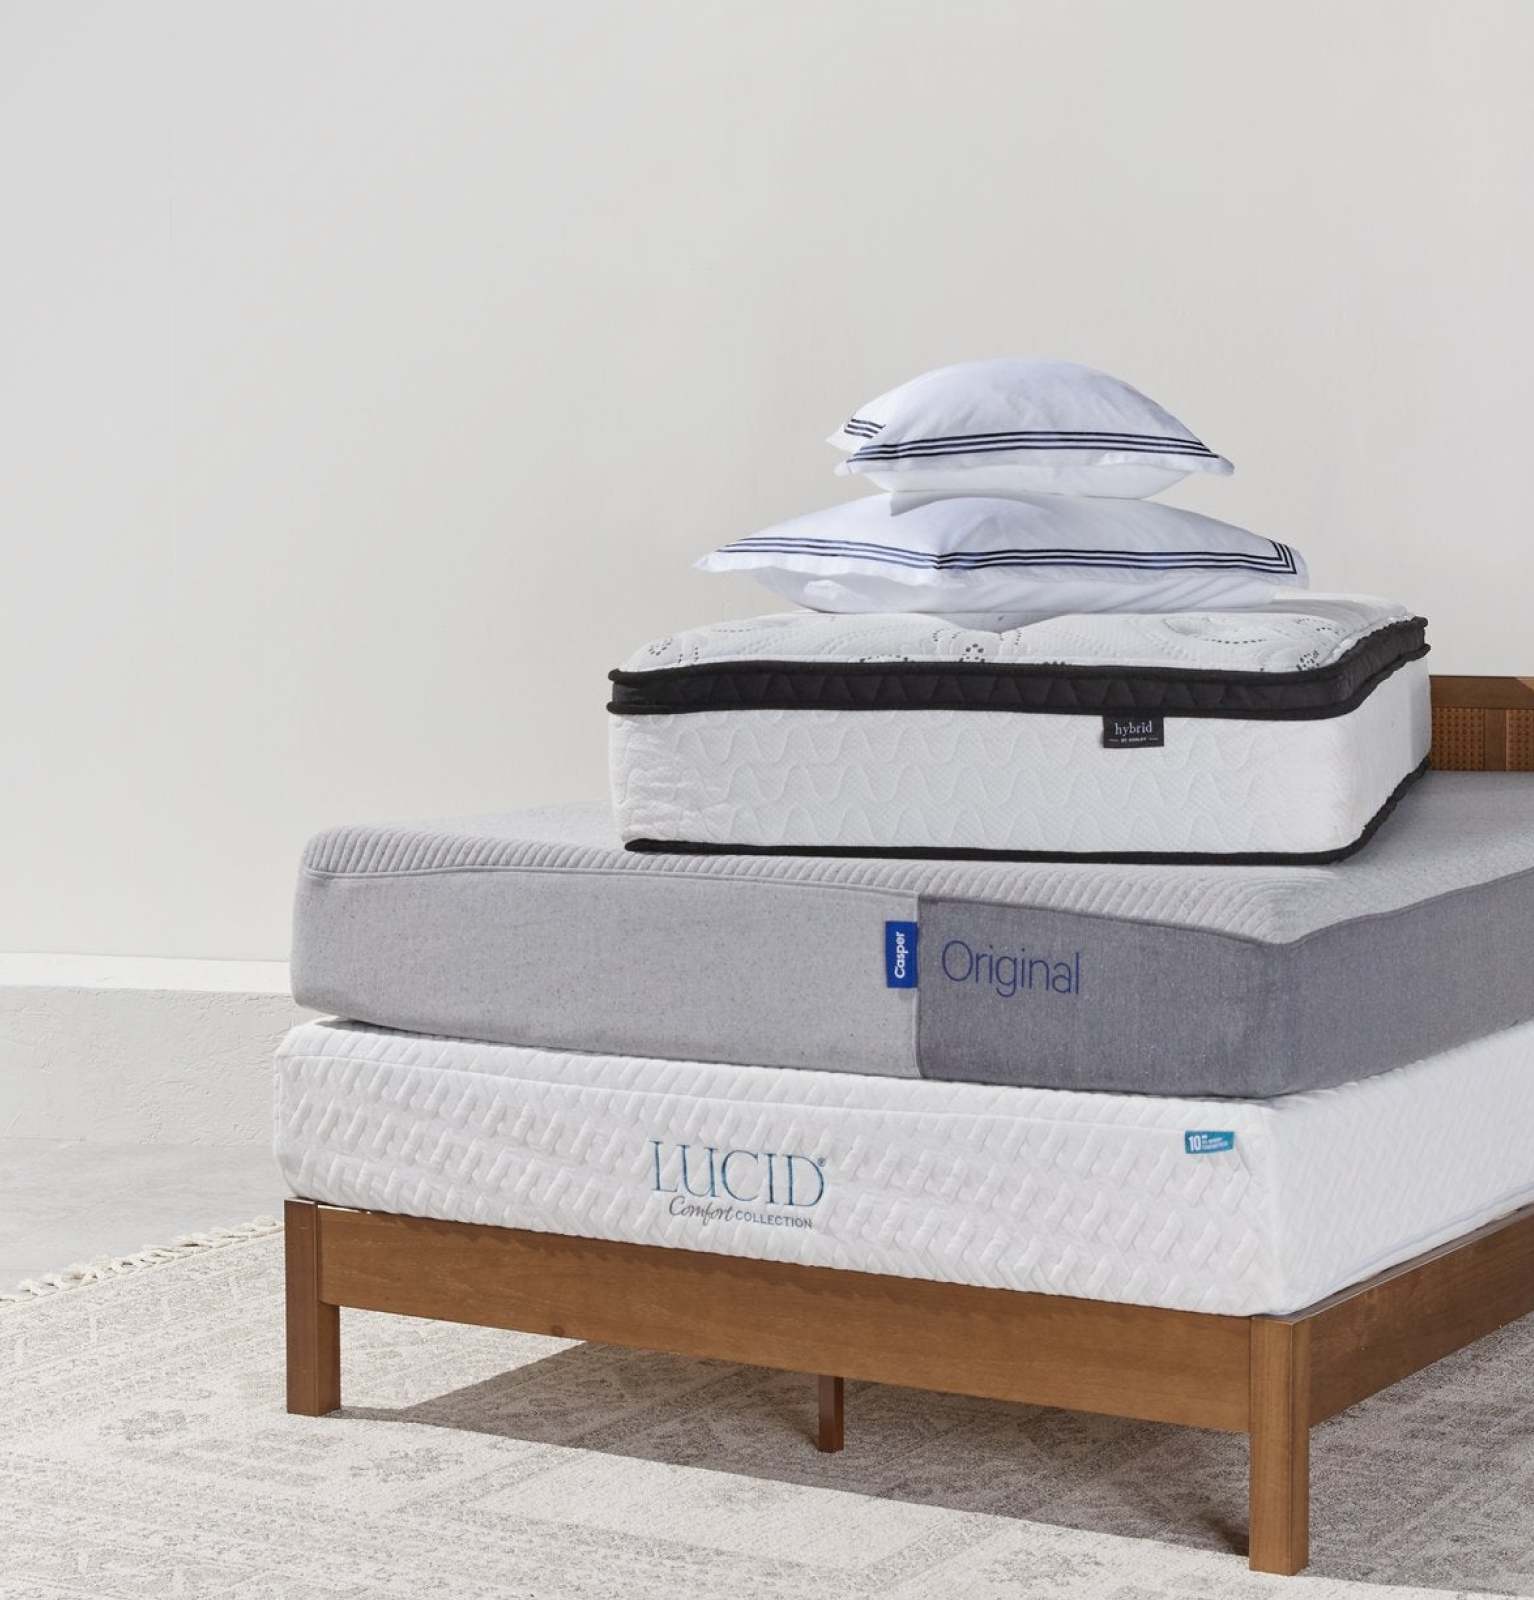 A Lucid stack of Lucid brand mattresses on a bed wooden mattress frame available online at Overstock.